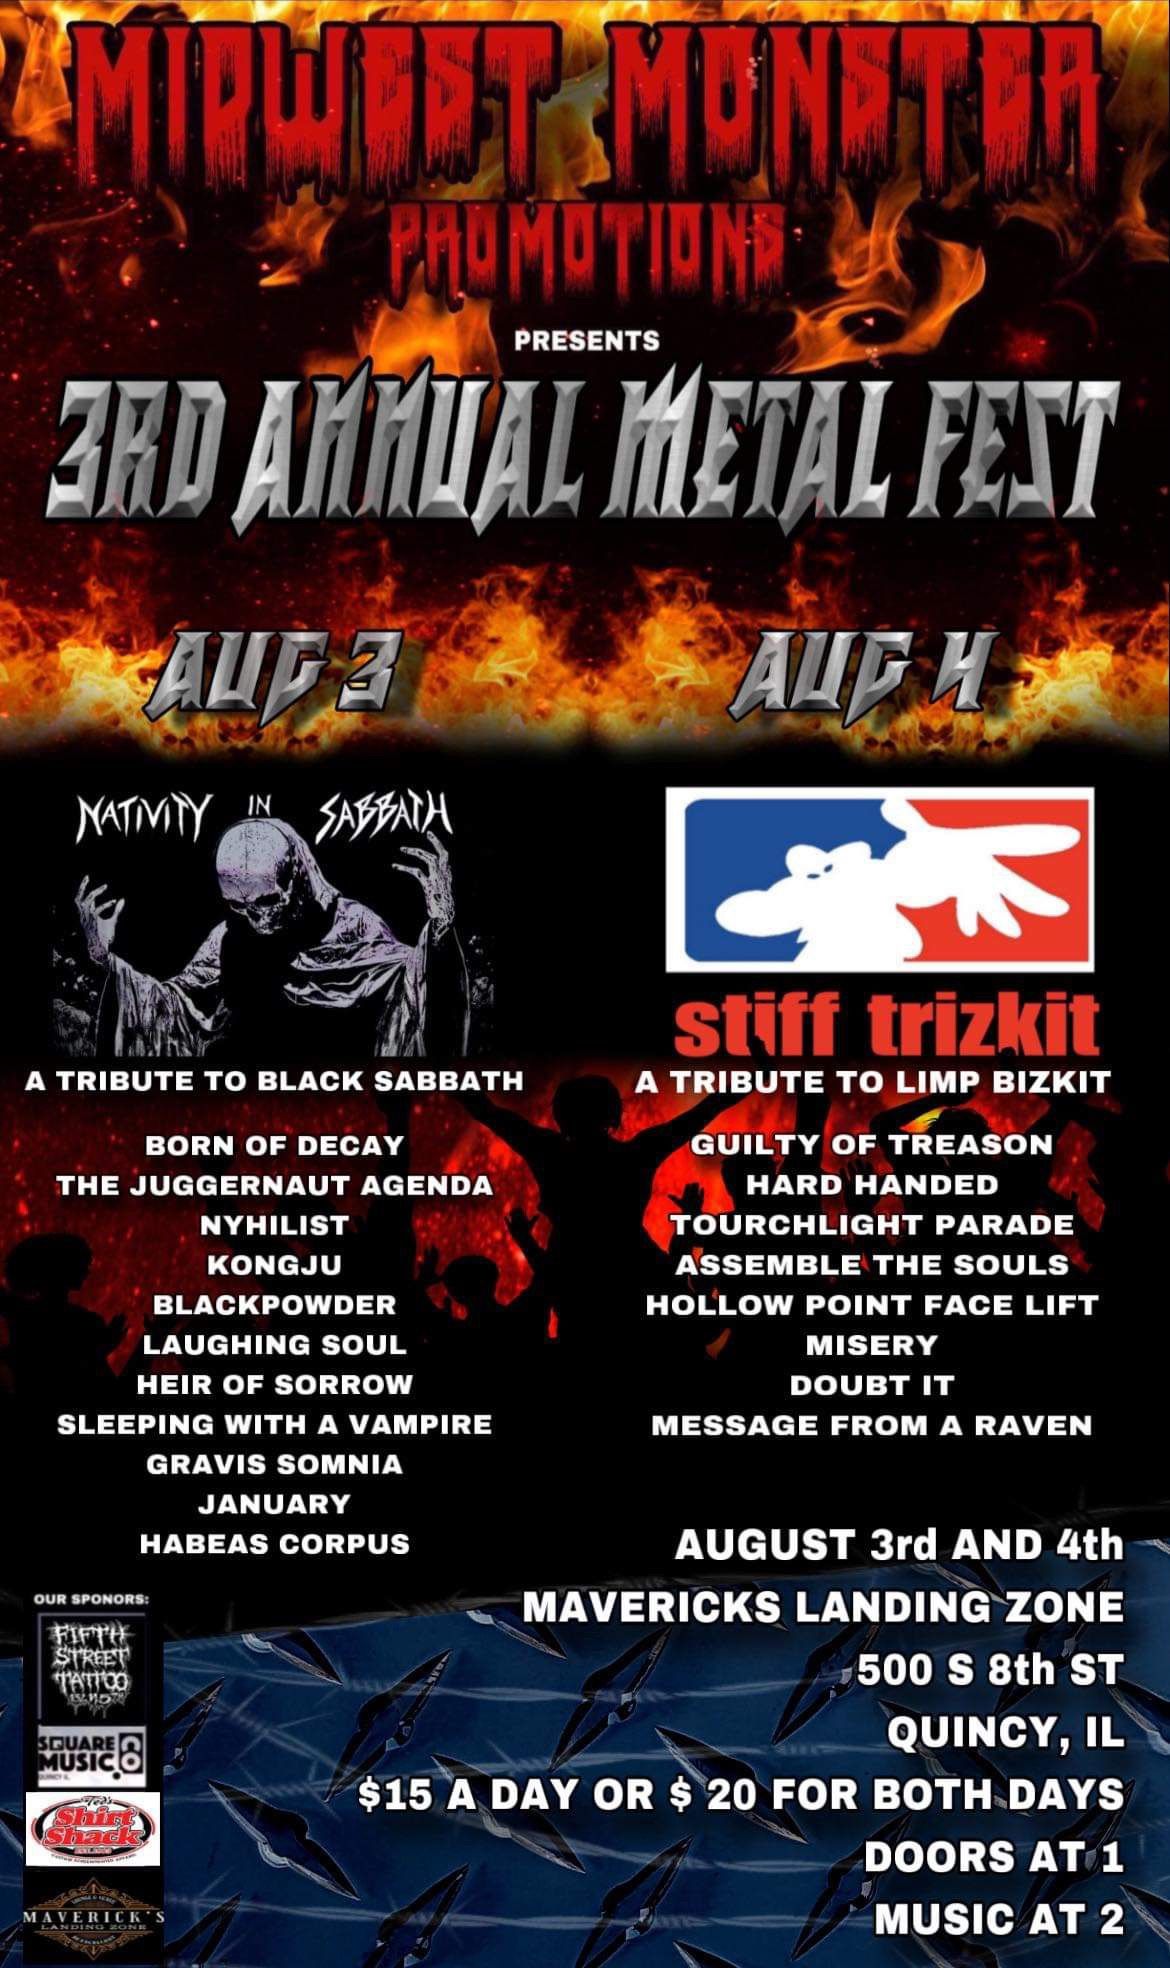 Midwest Monster 3rd annual Metal fest 